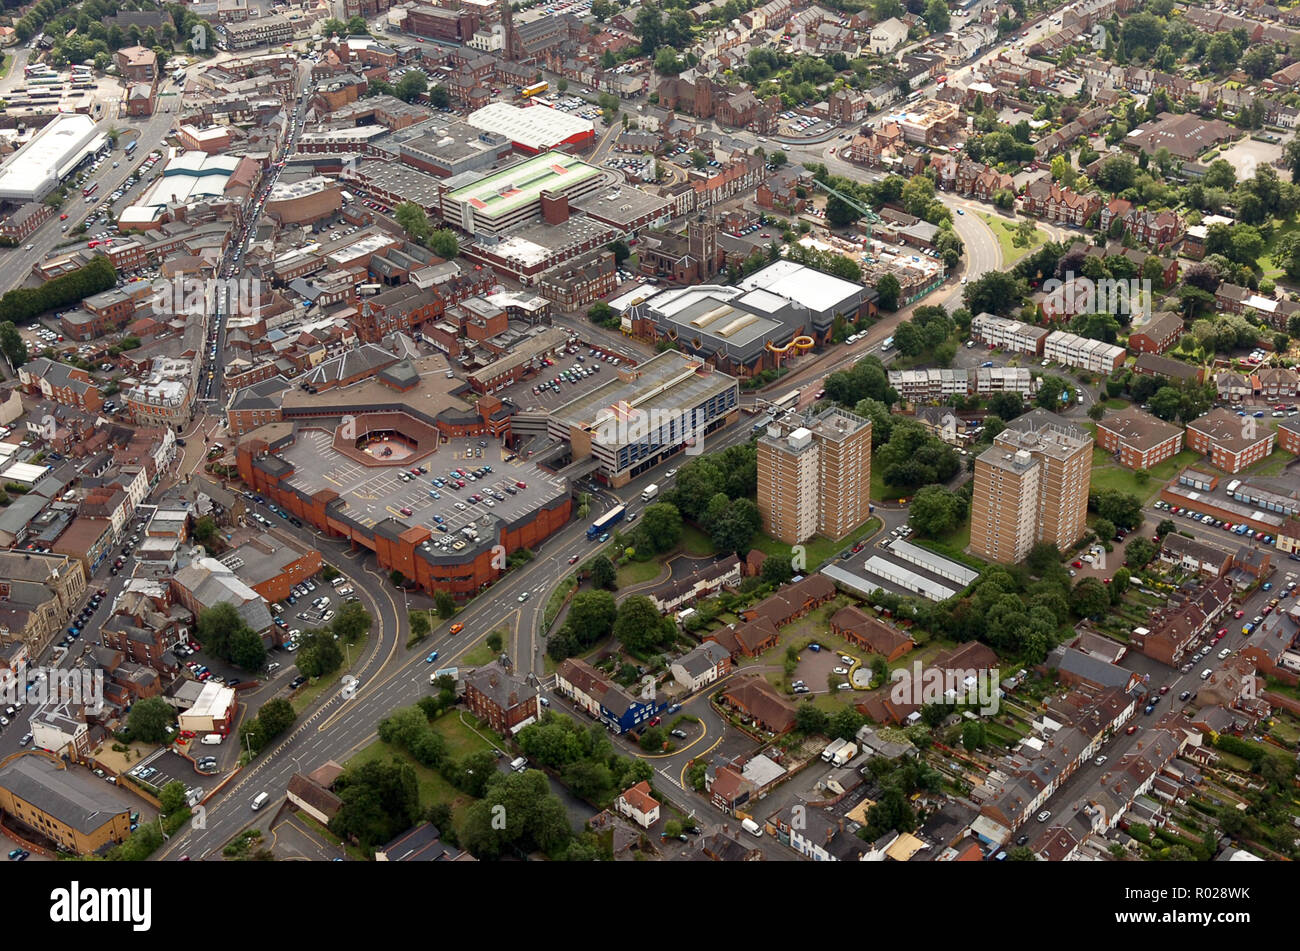 An aerial view of Stourbridge town centre in the West Midlands. Stock Photo